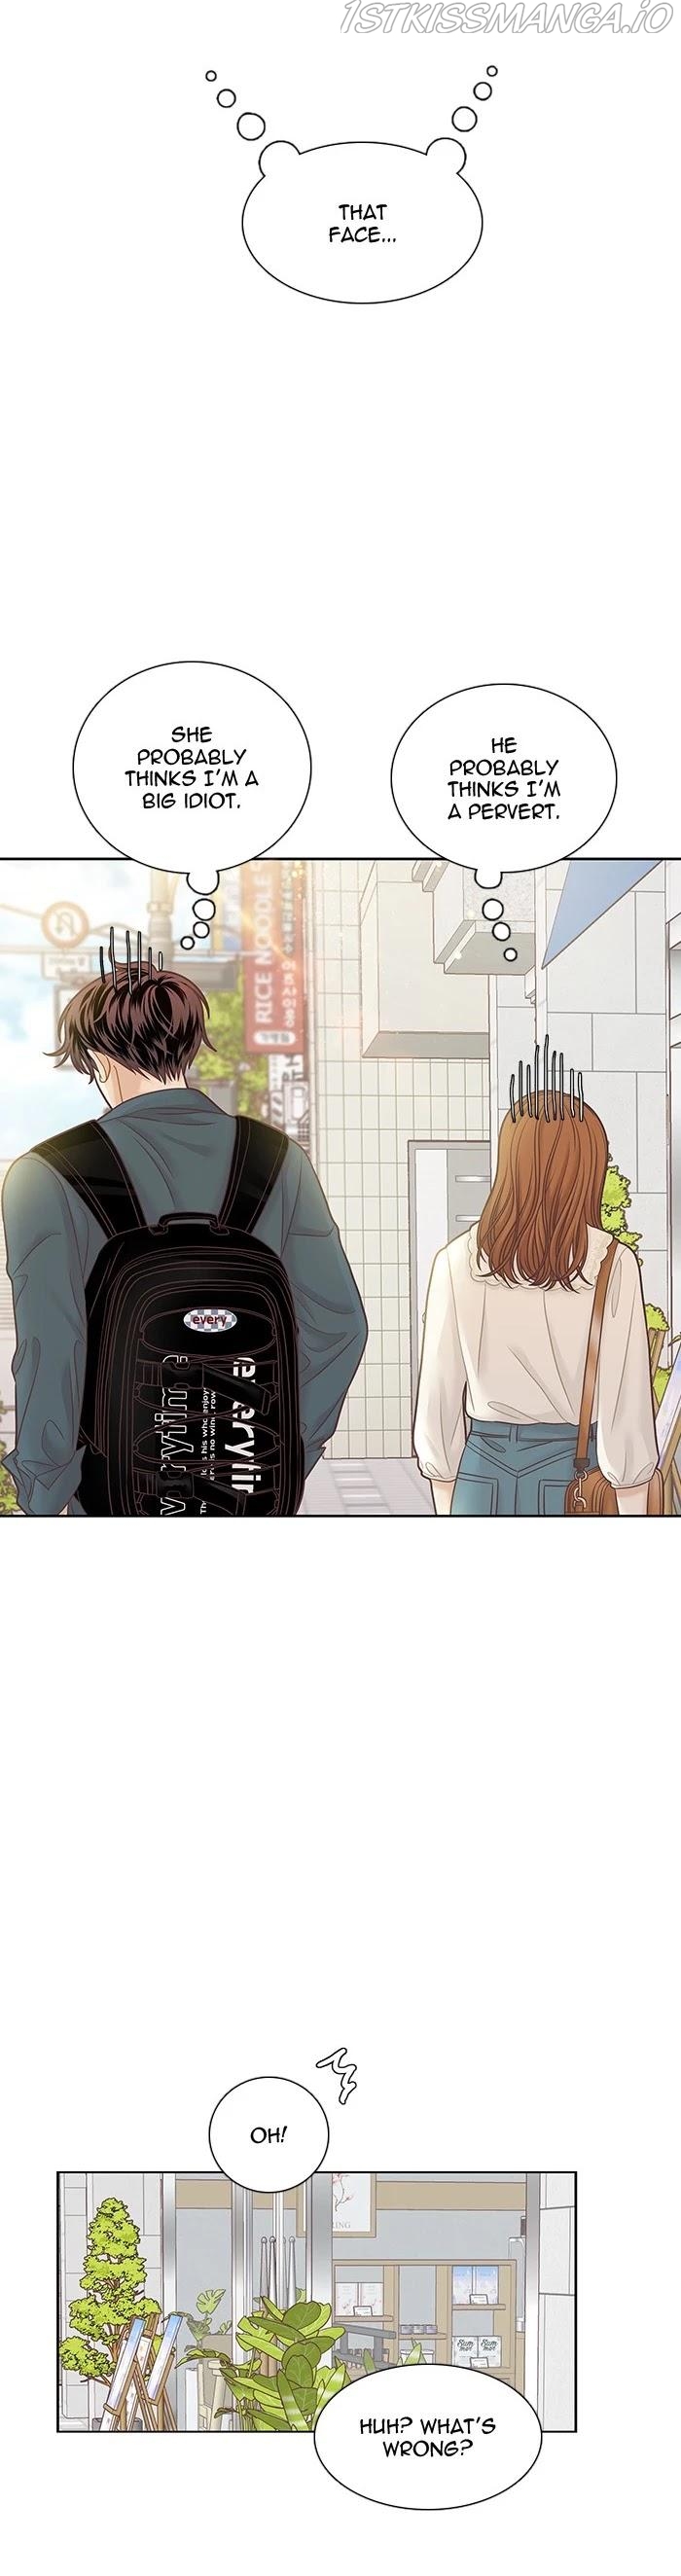 Girl’s World ( World of Girl ) Chapter 280 - Page 2